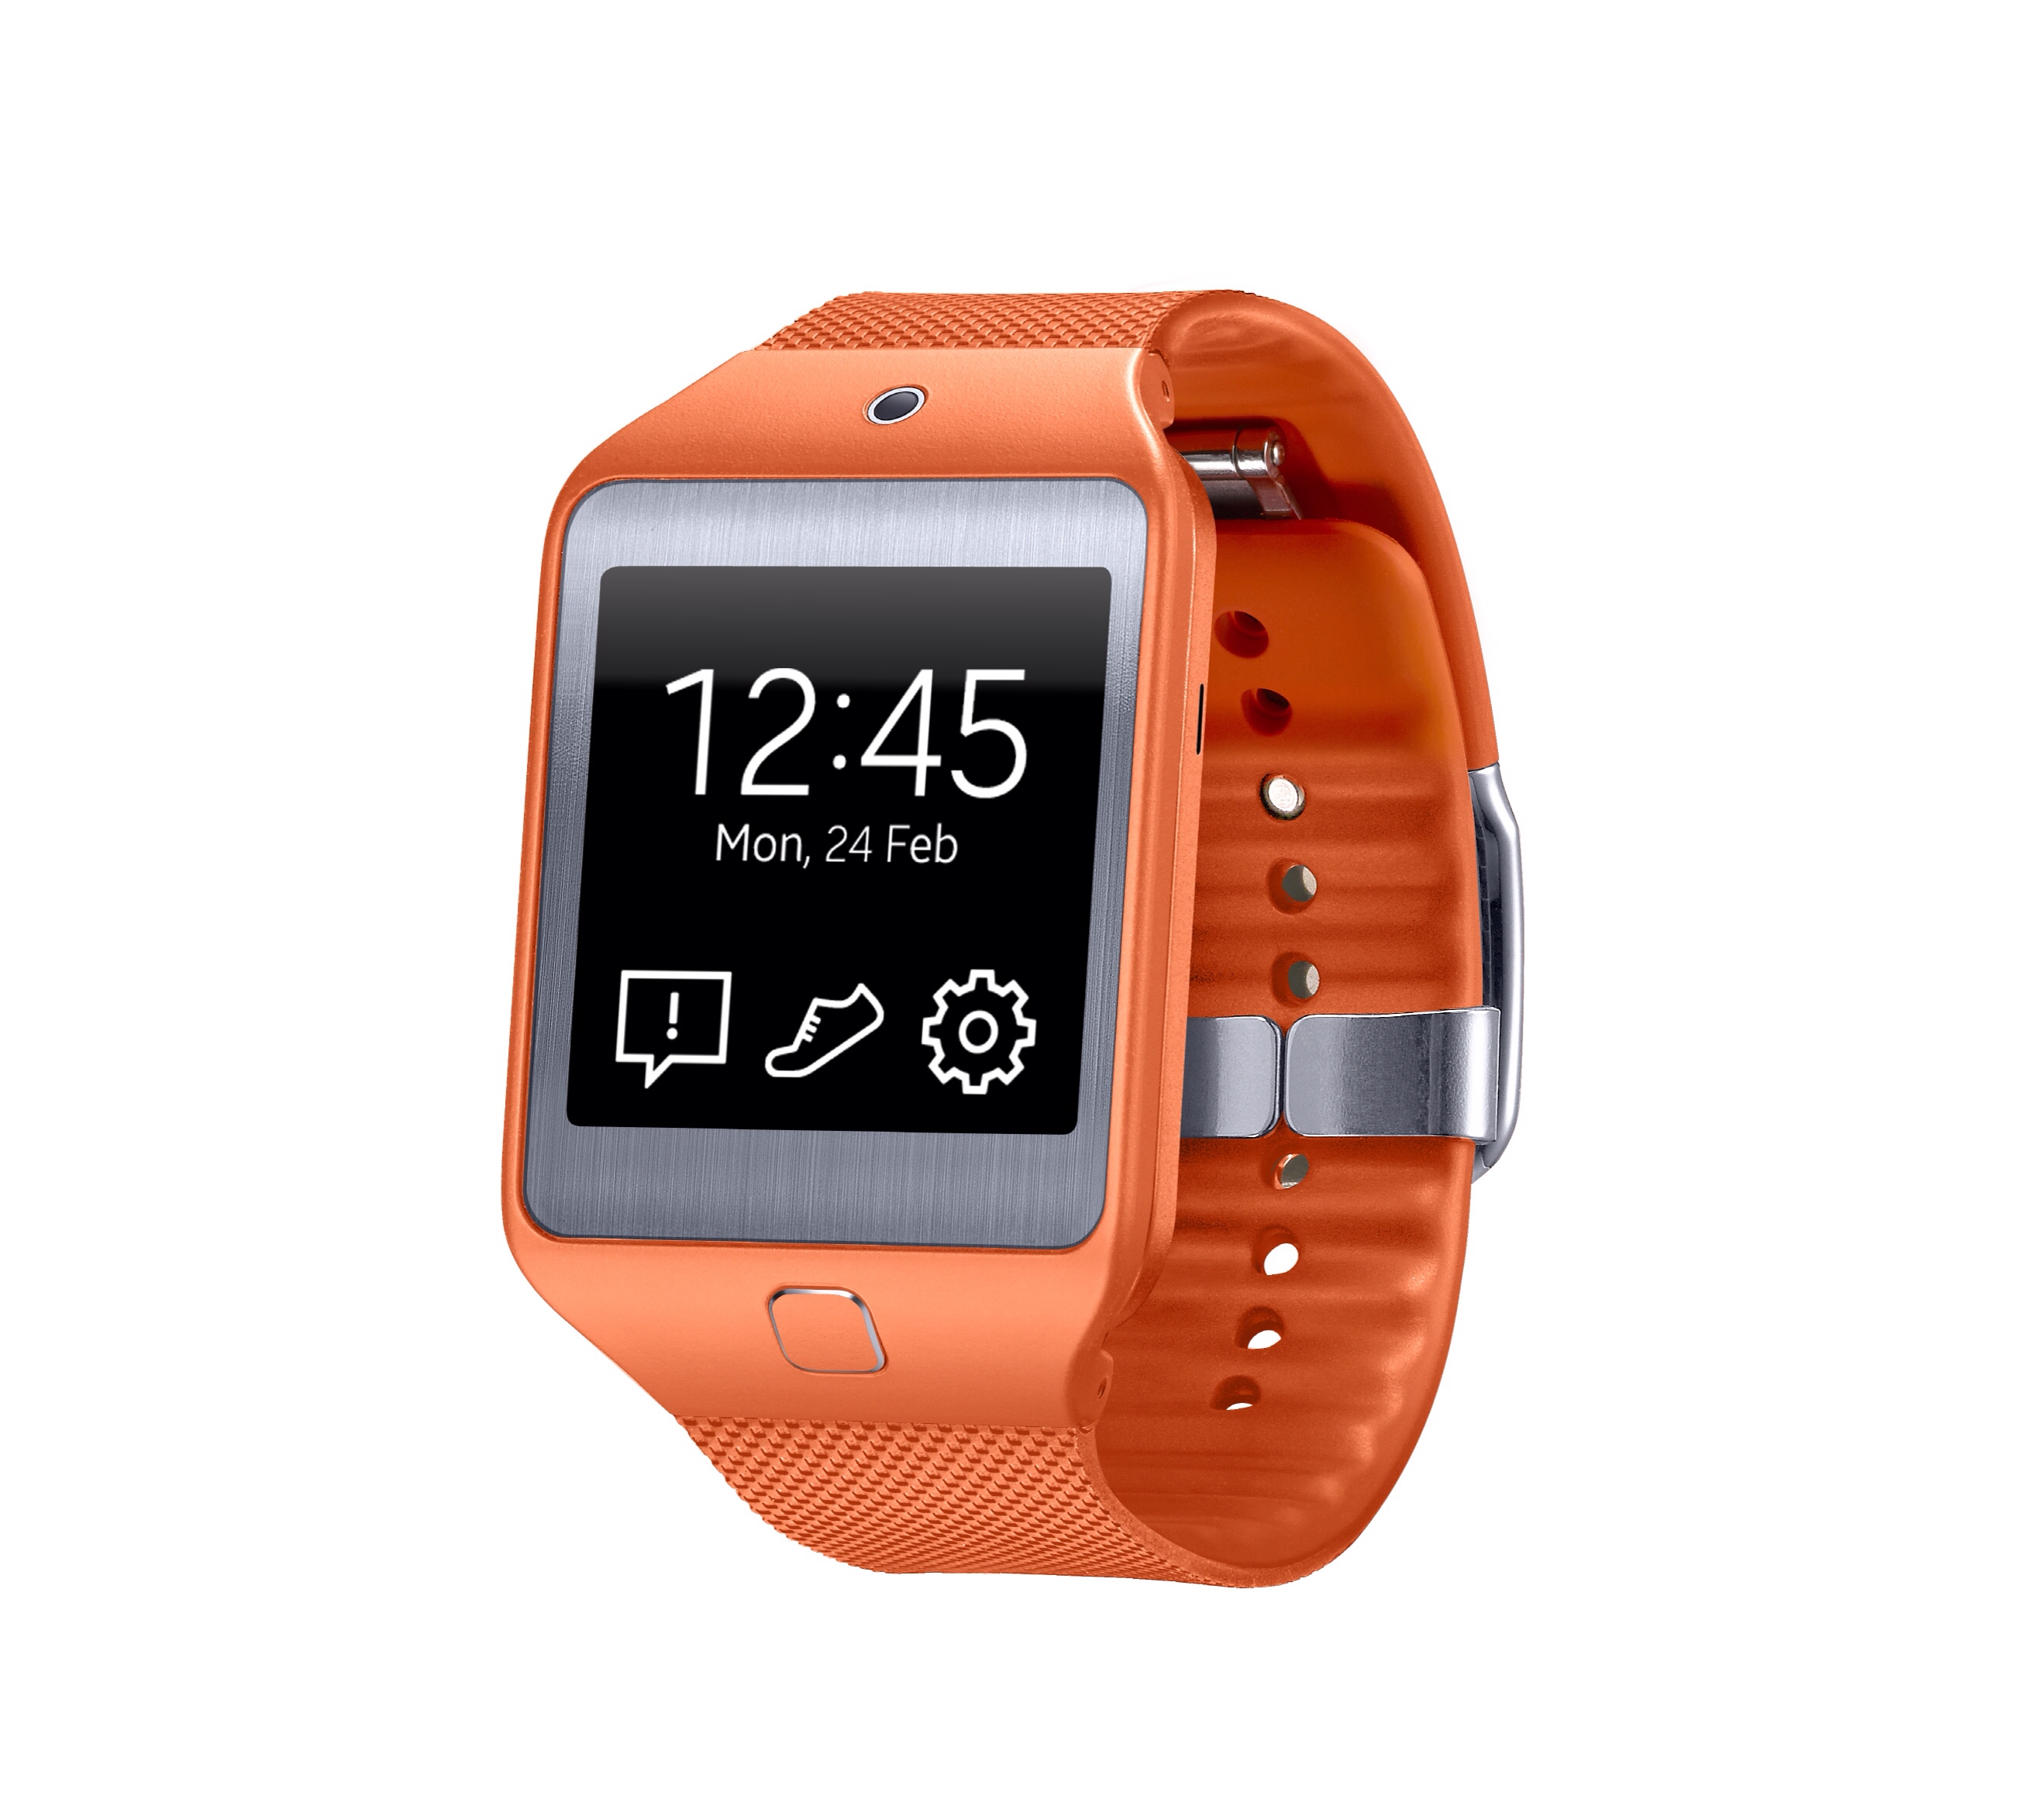 Samsung Announces Two New Galaxy Gear Devices